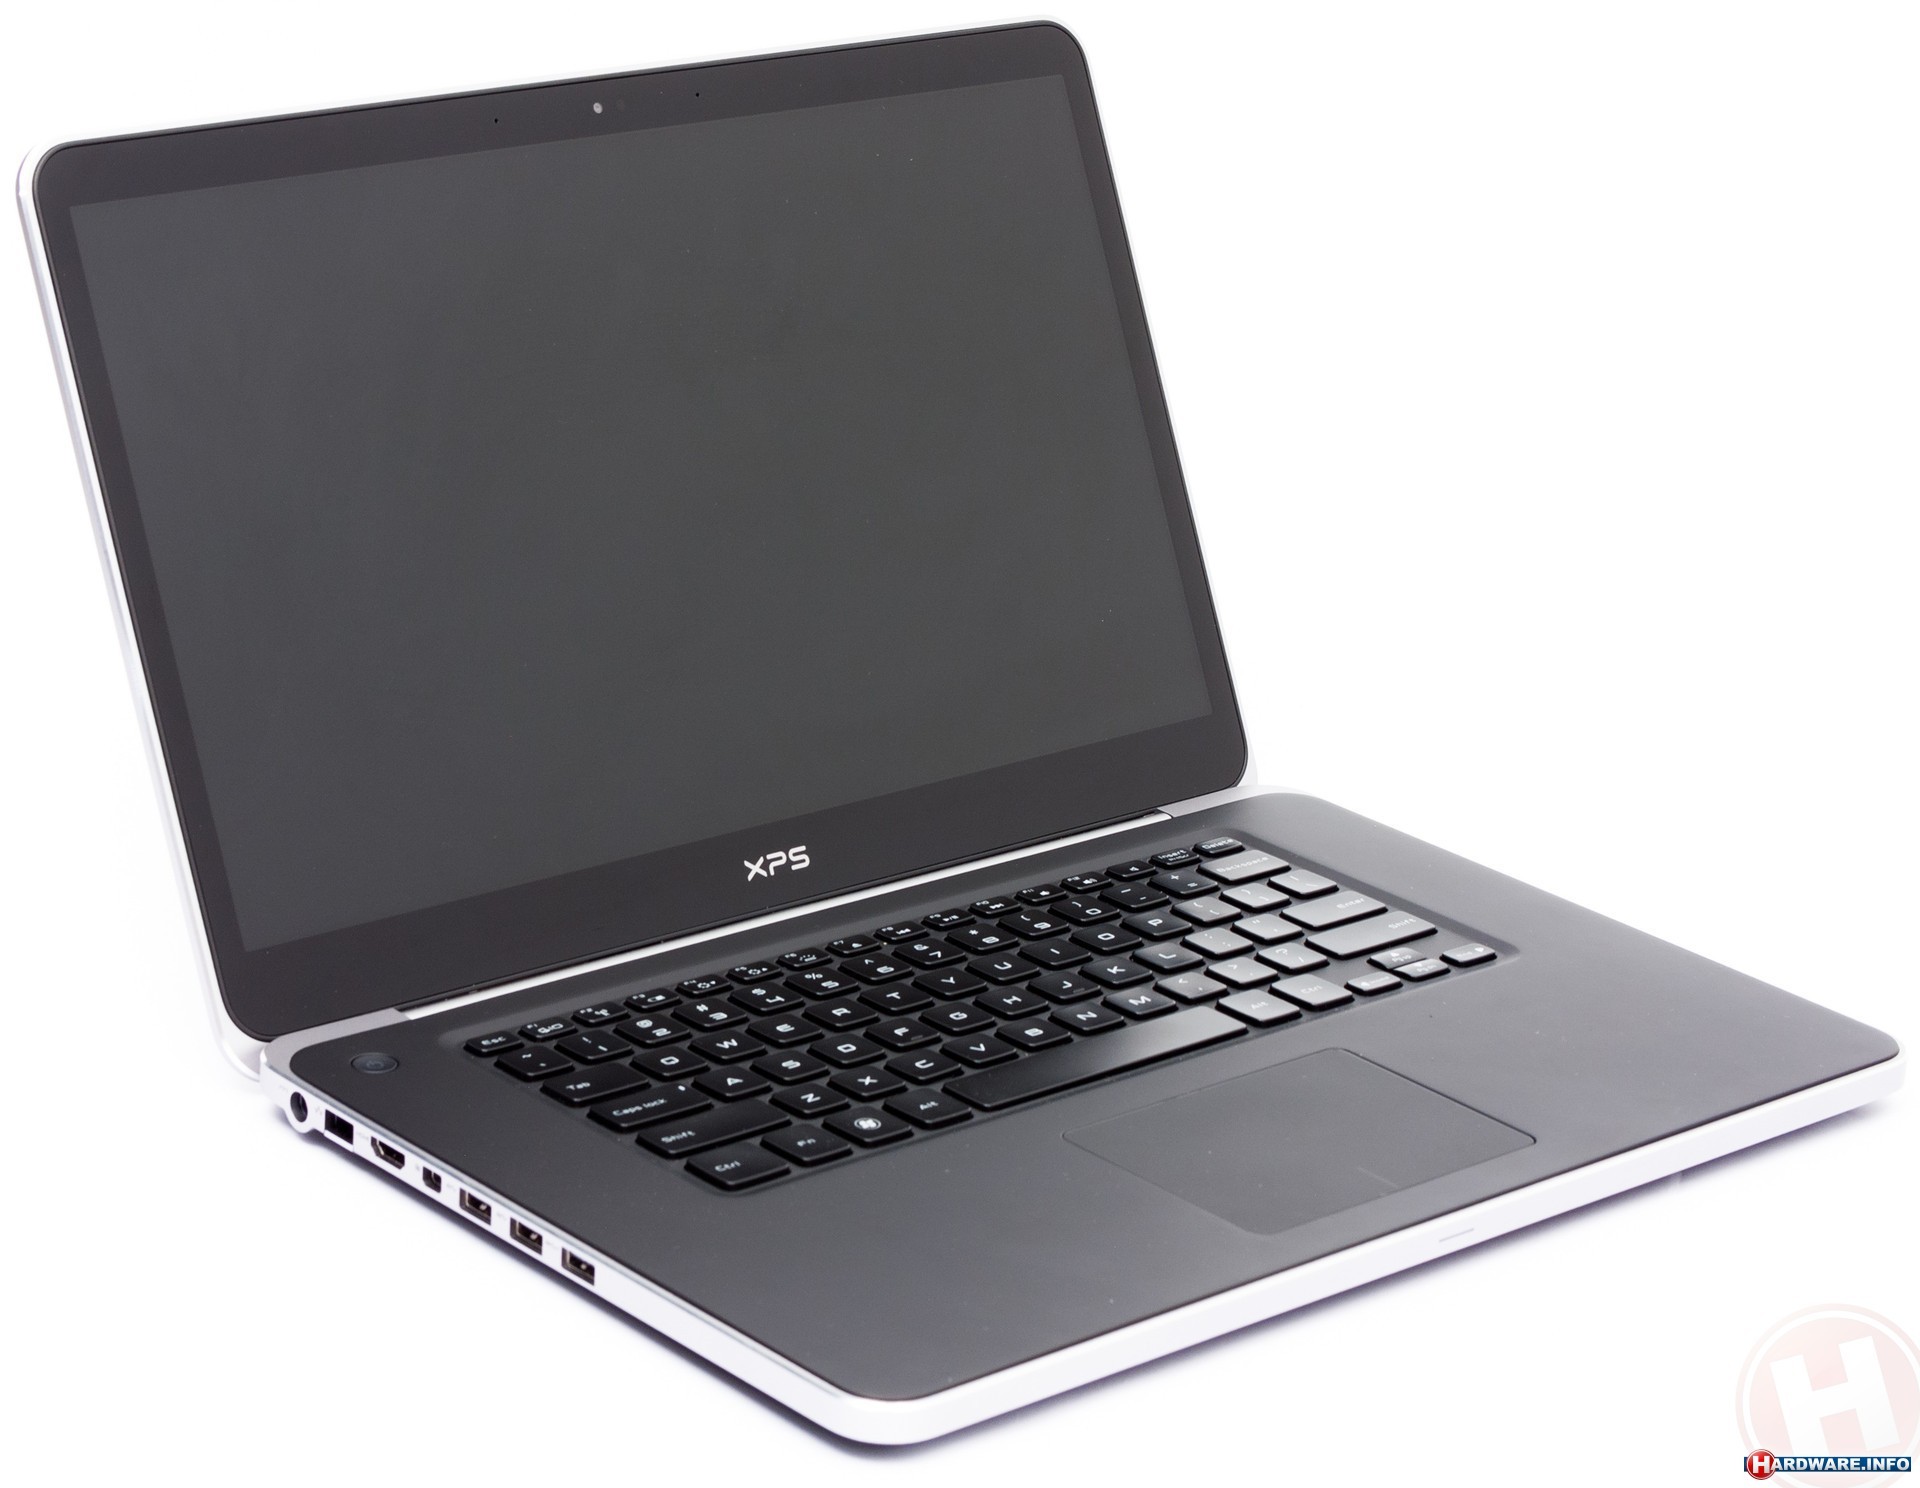 Buy Dell xps series at Evetech.co.za